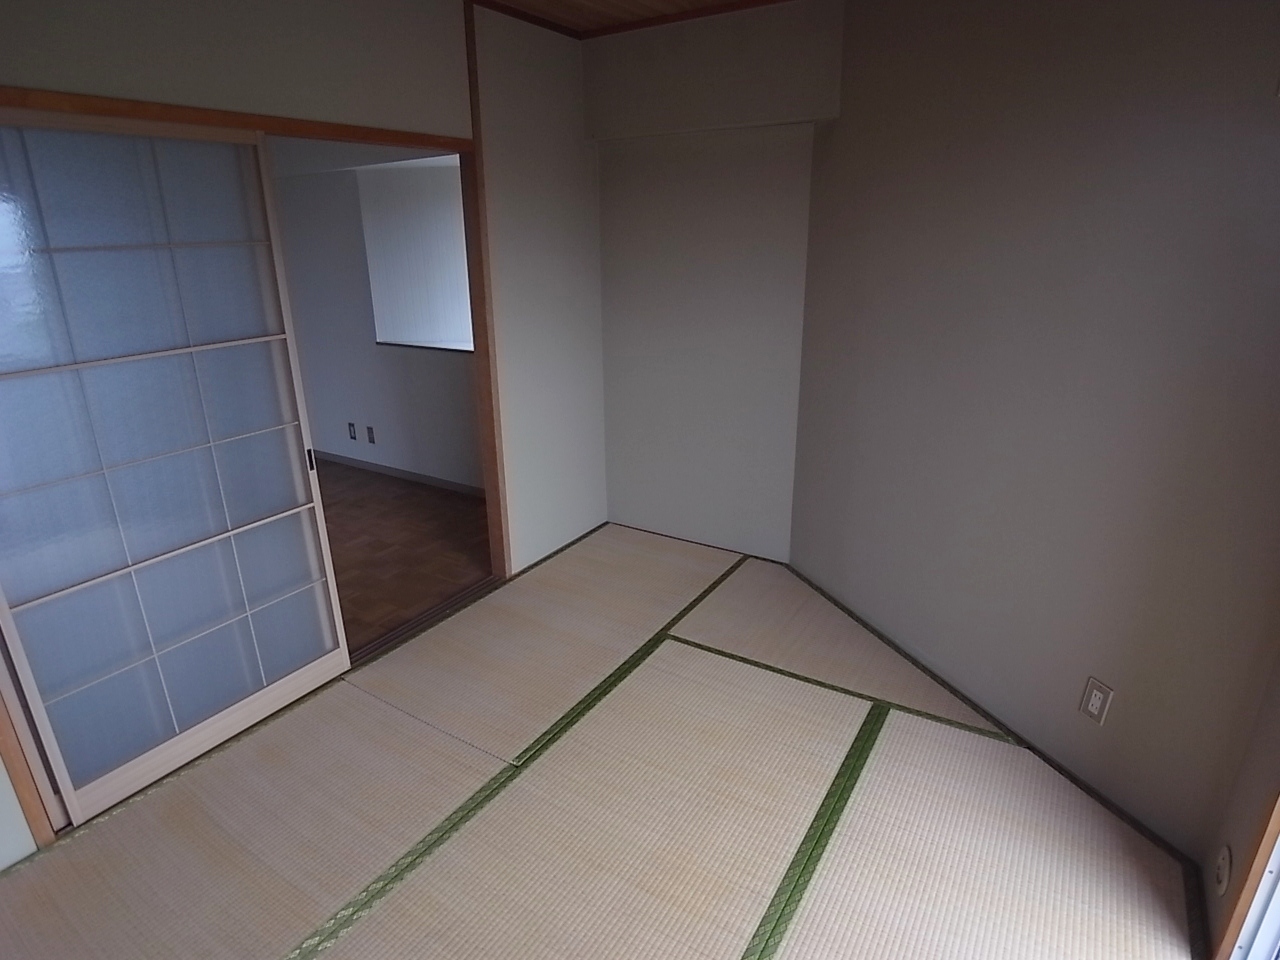 Other room space. Middle. It is not the form I ^ ^